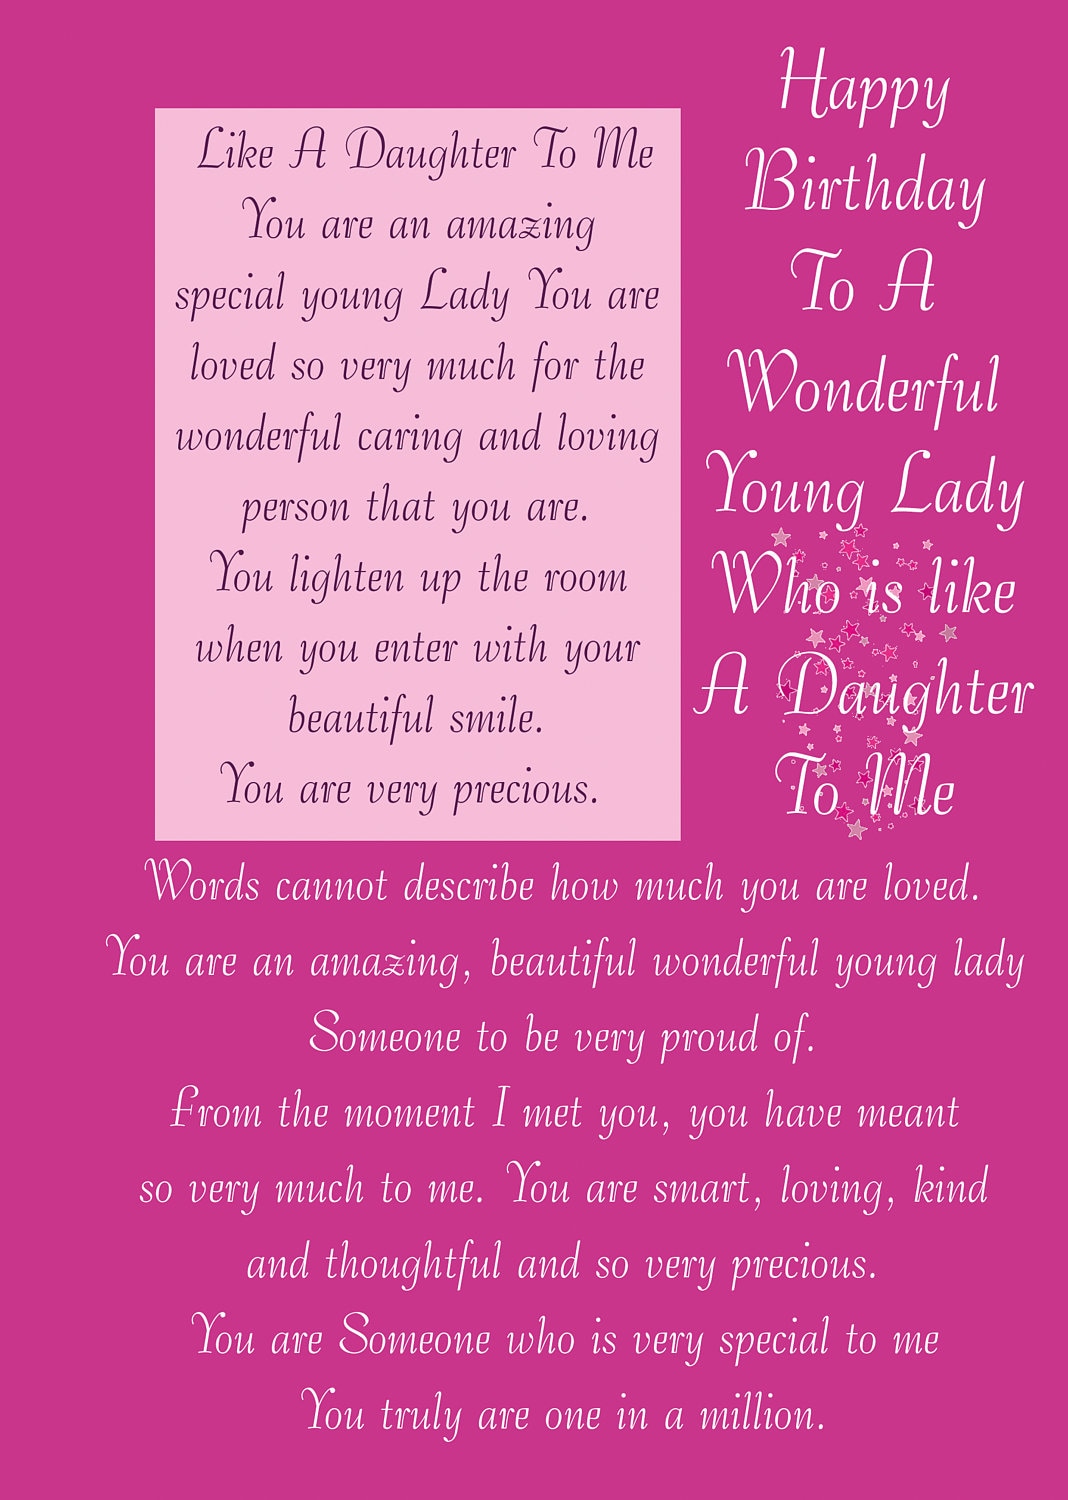 Like a Daughter Birthday Card